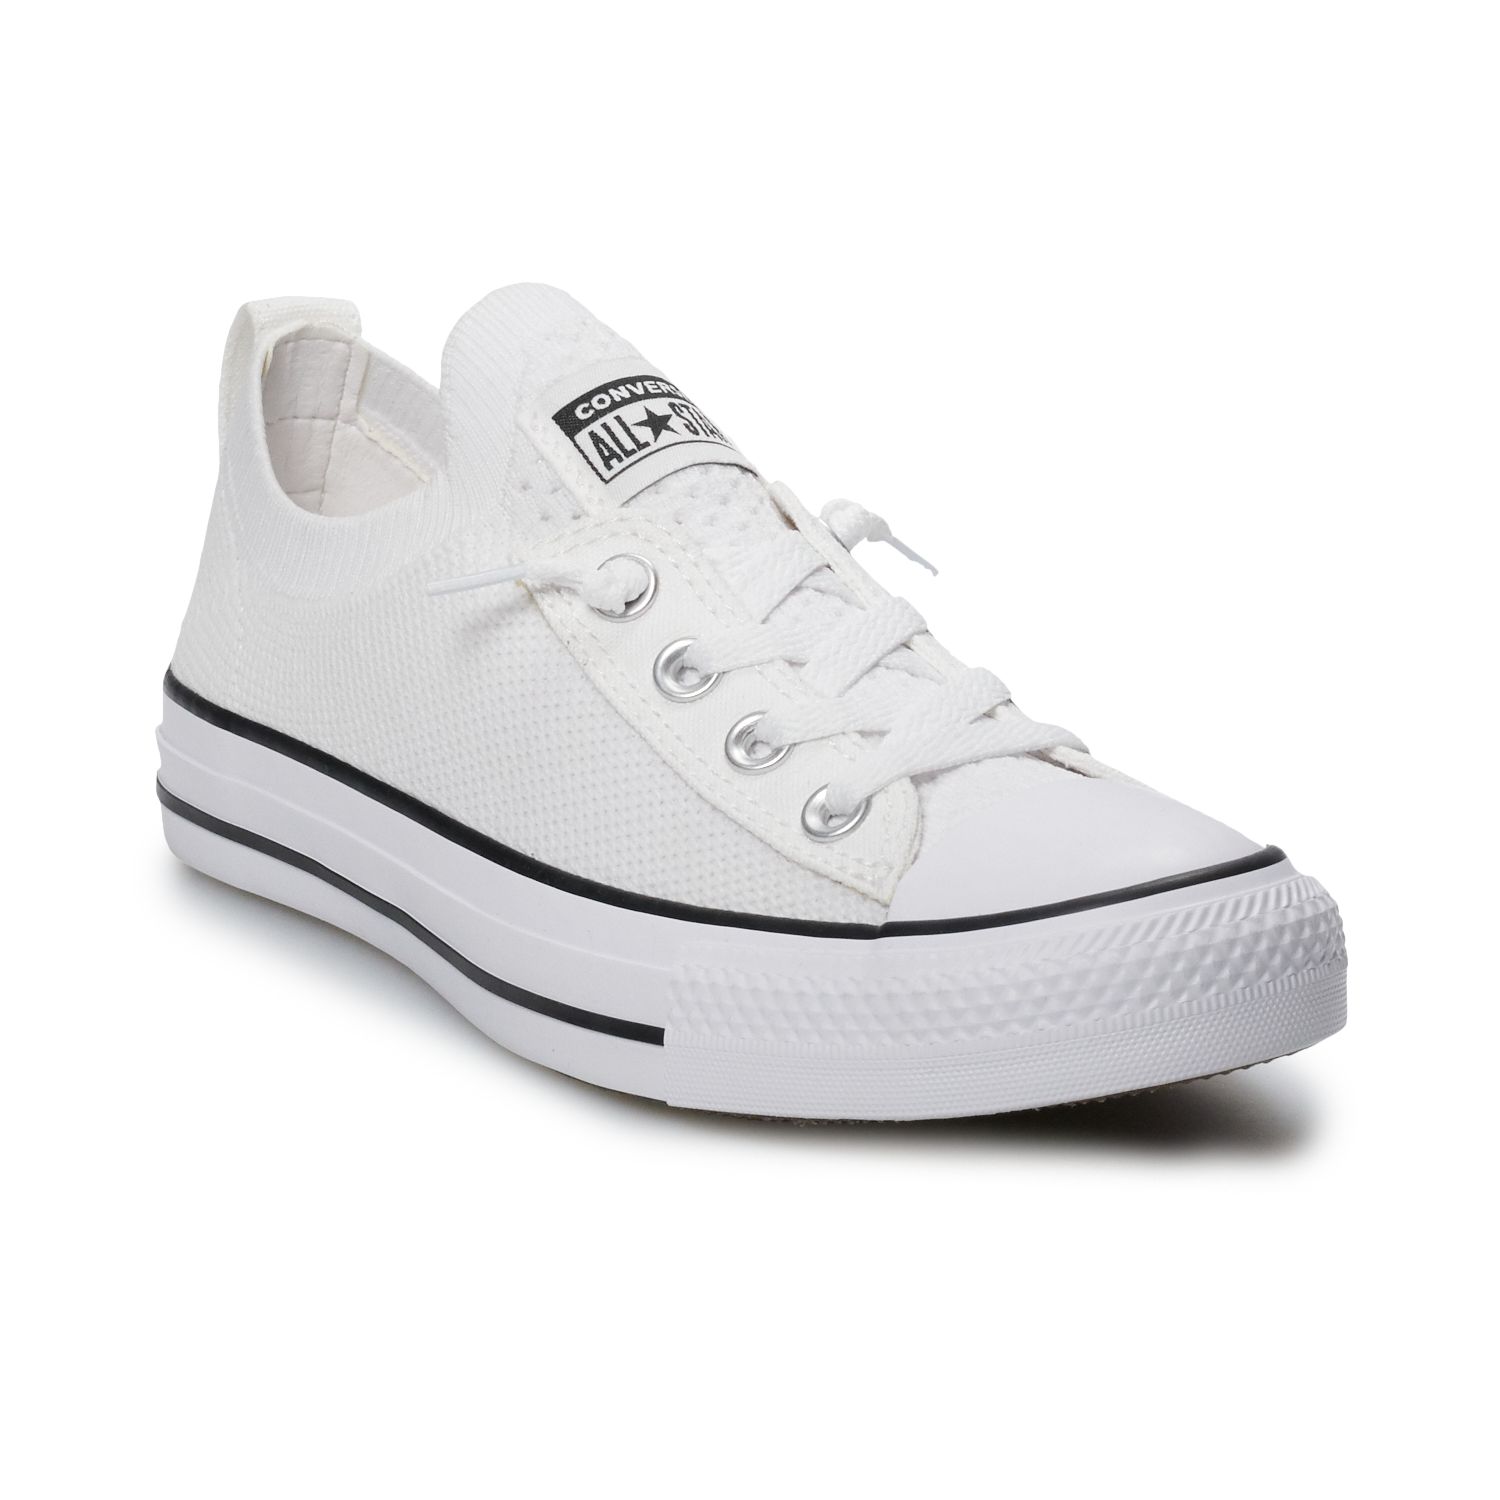 converse for womens